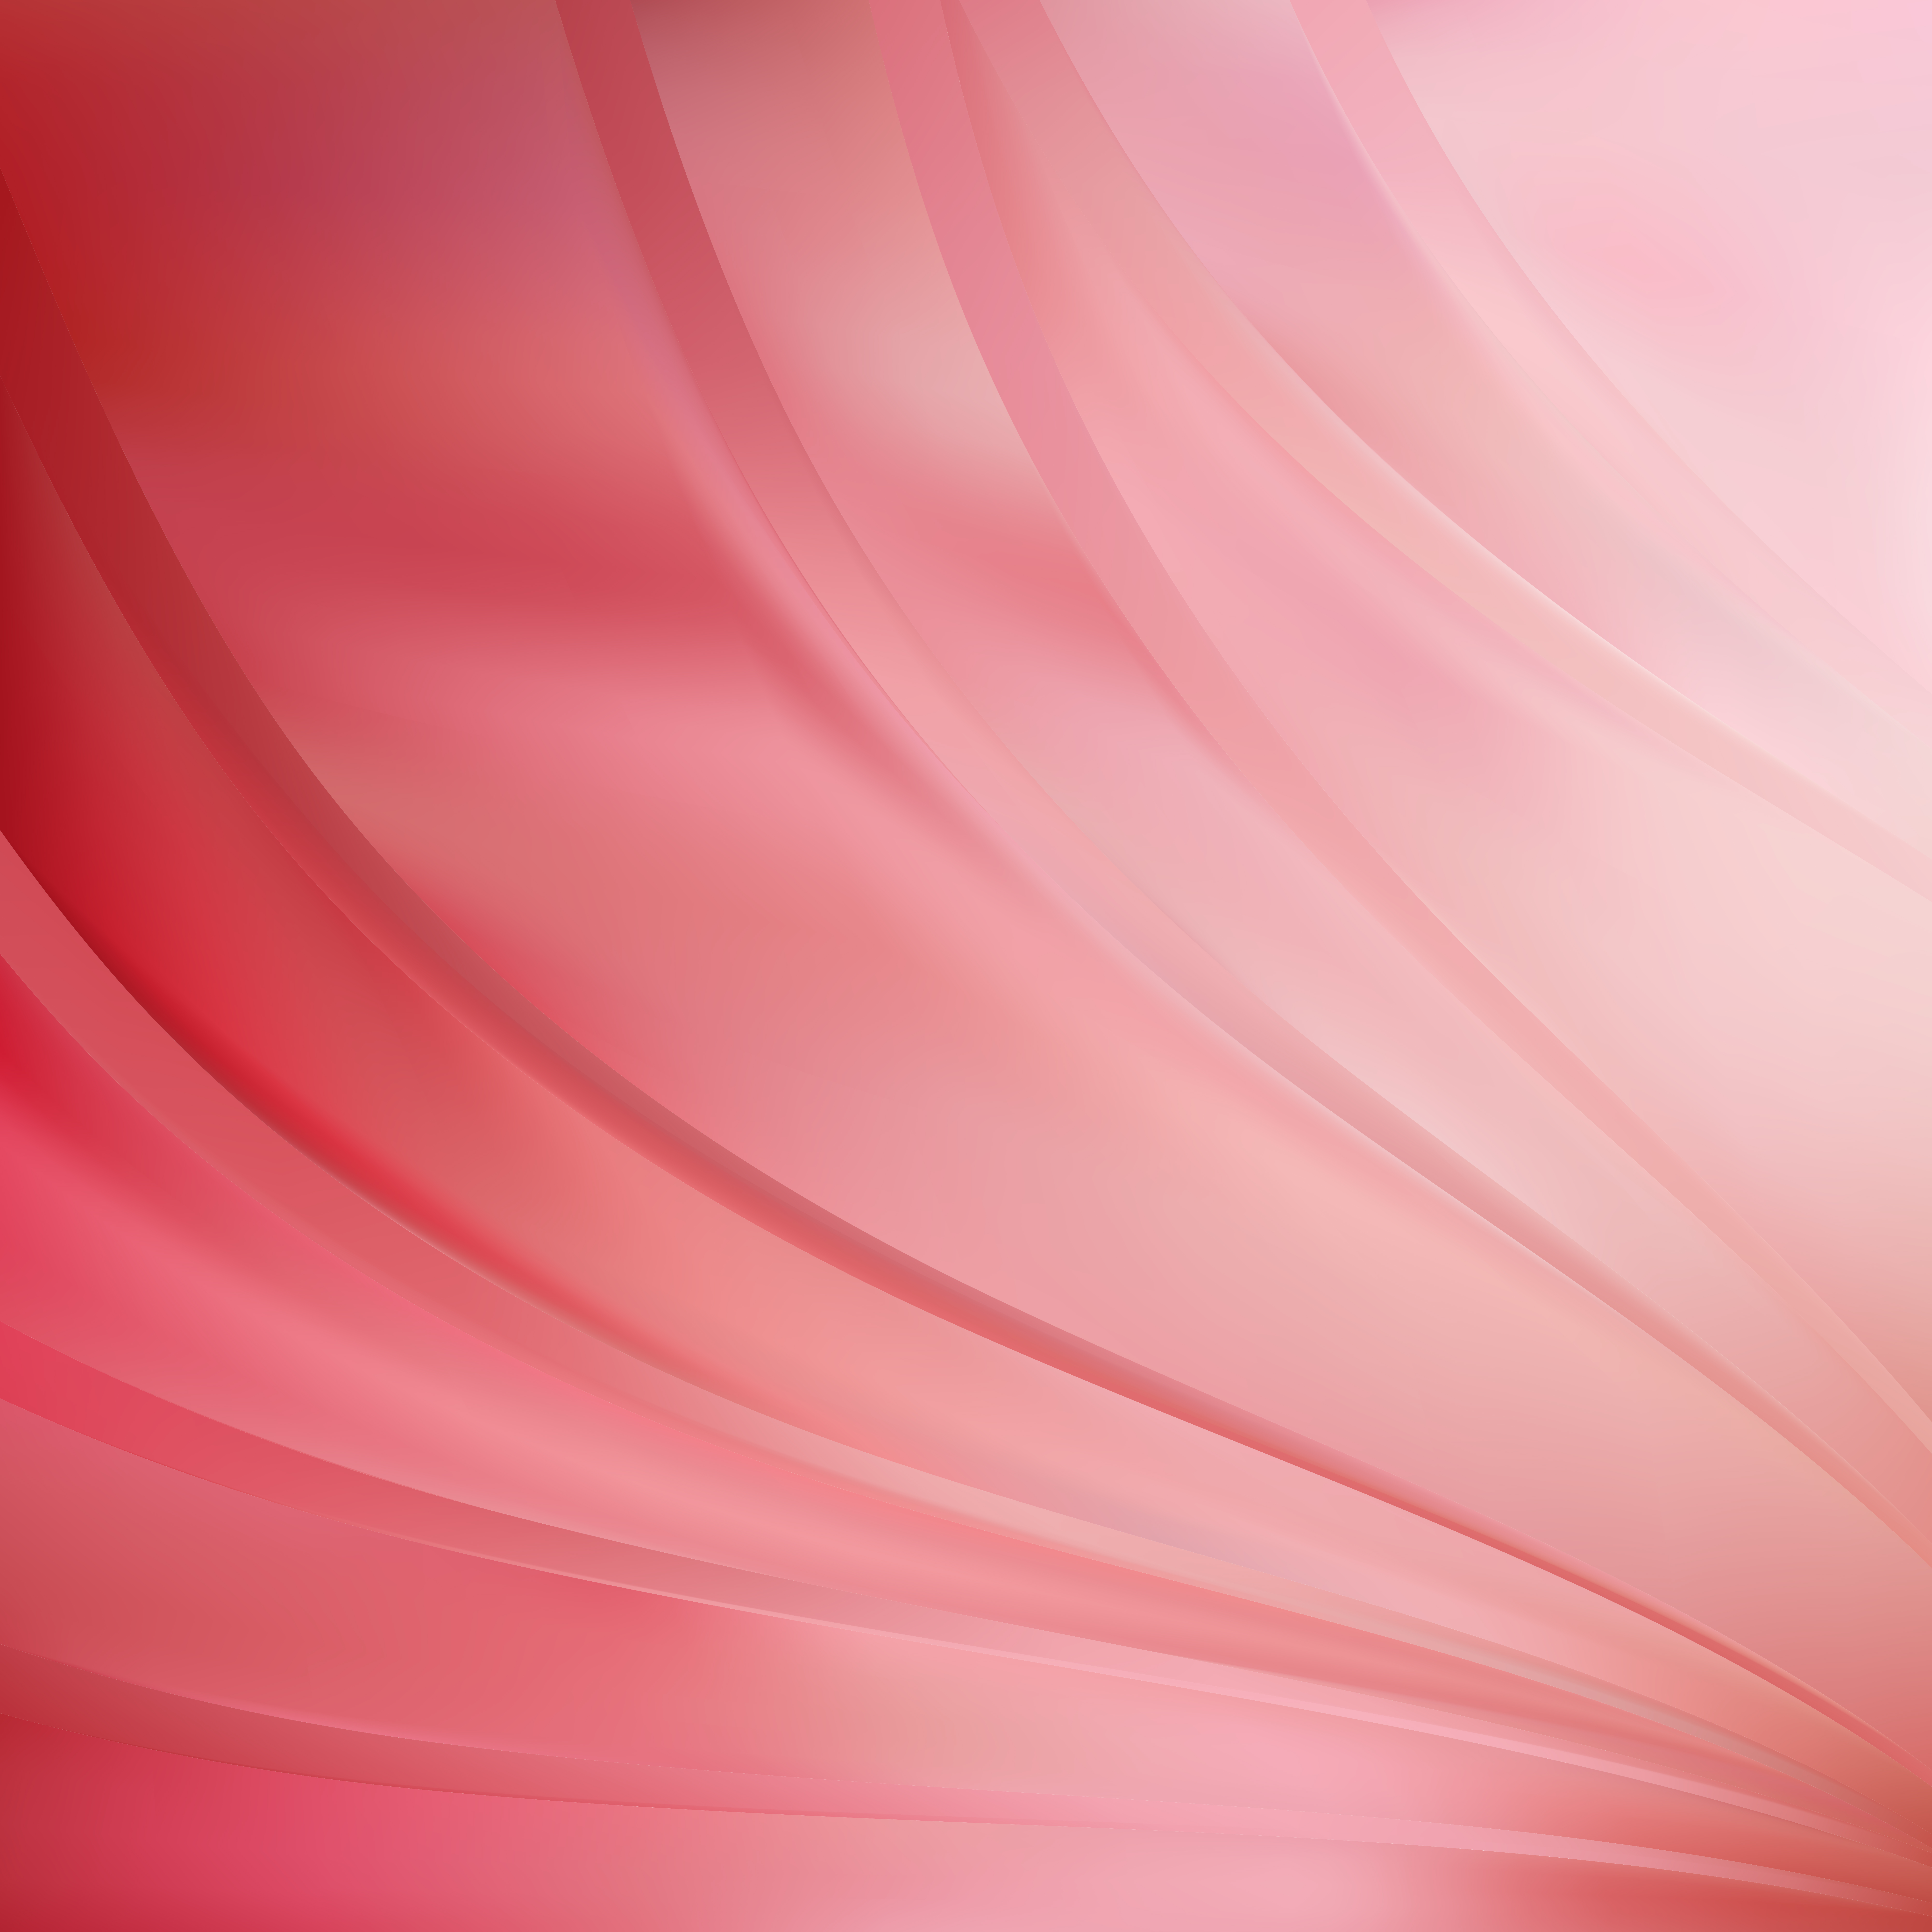 Light Red Background